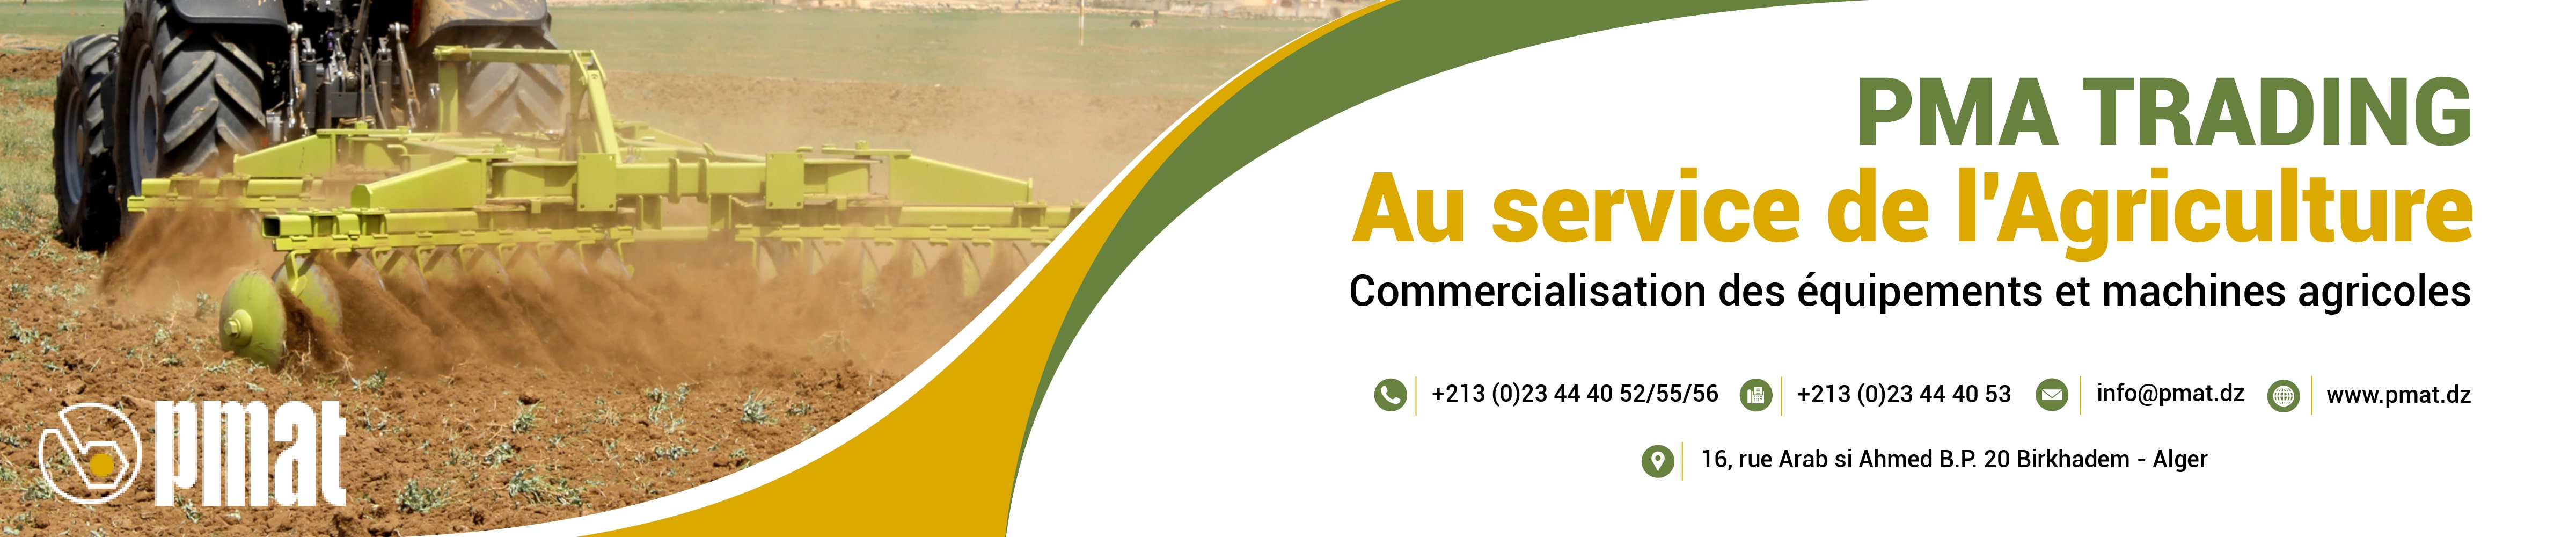 Production Machinisme Agricole & Trading